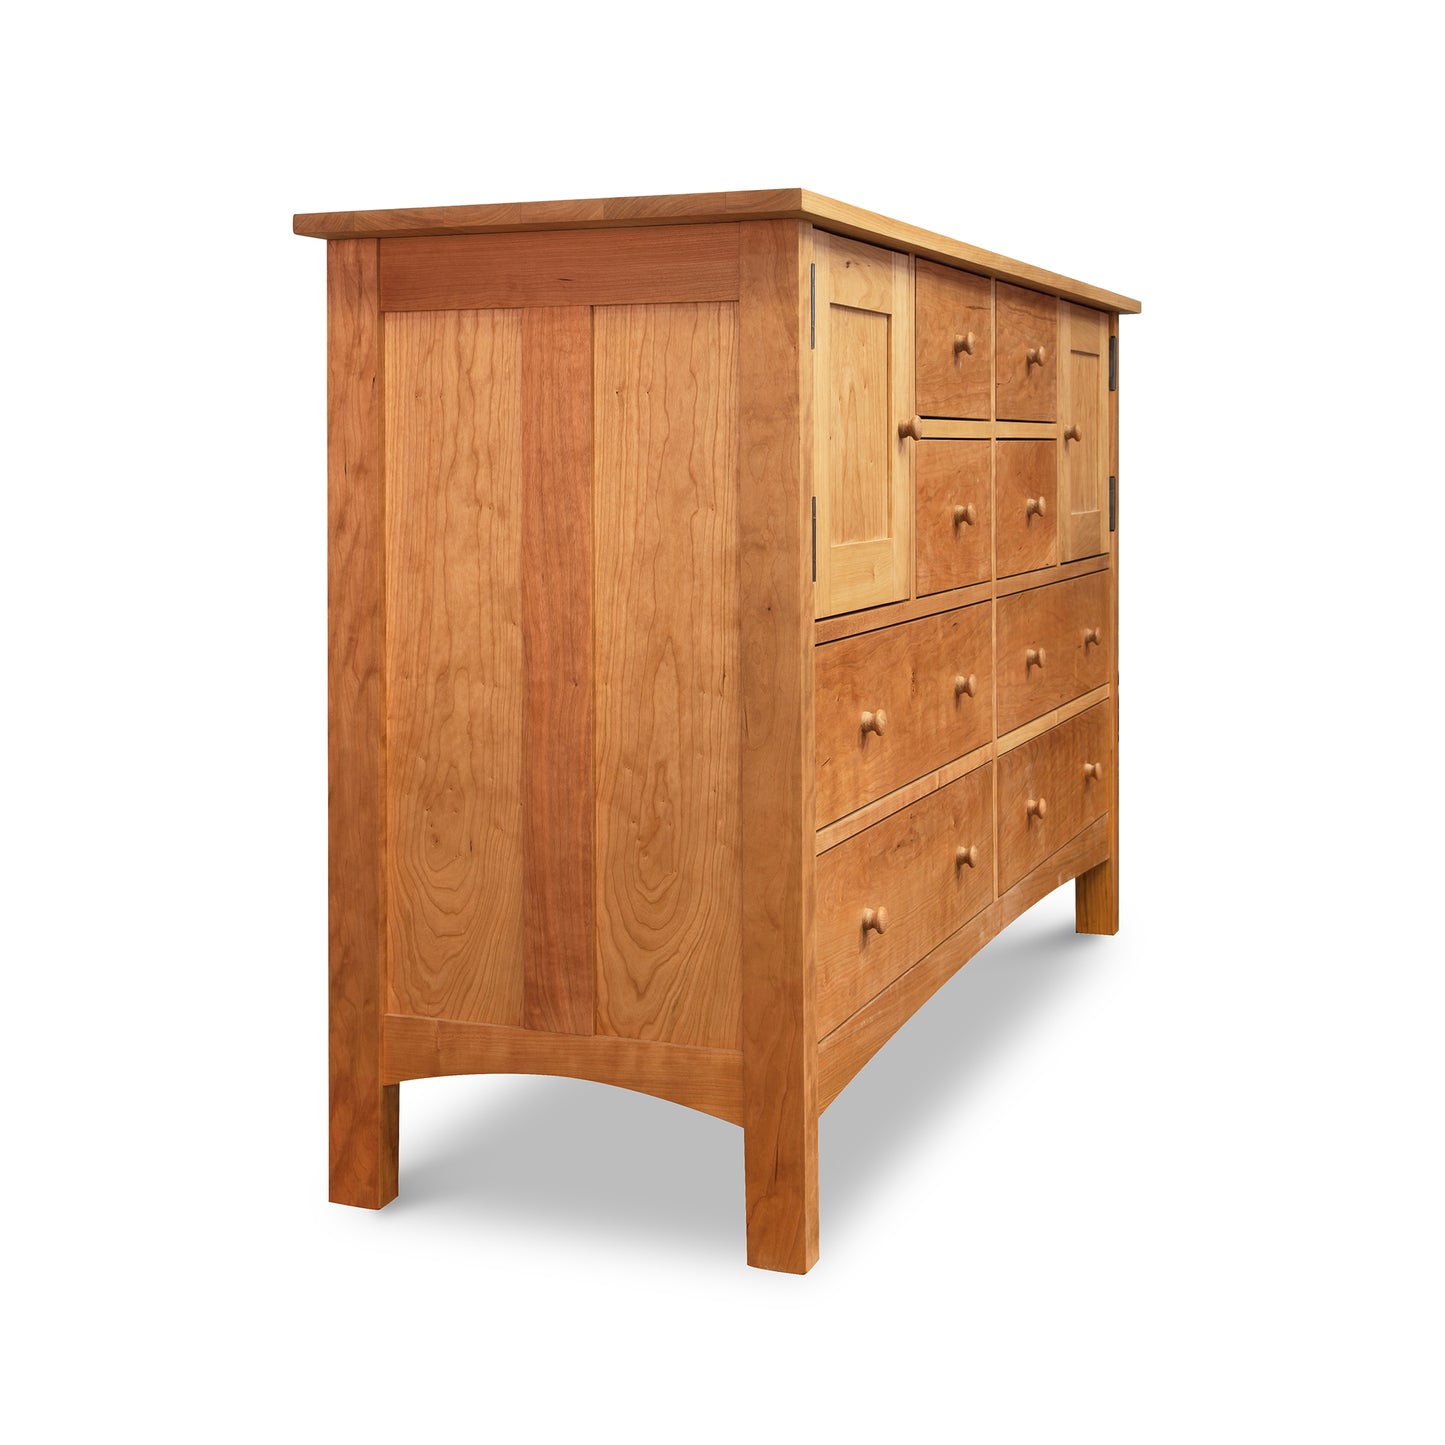 A solid wood Vermont Furniture Designs Burlington Shaker 8-Drawer 2-Door dresser with multiple drawers on a white background.